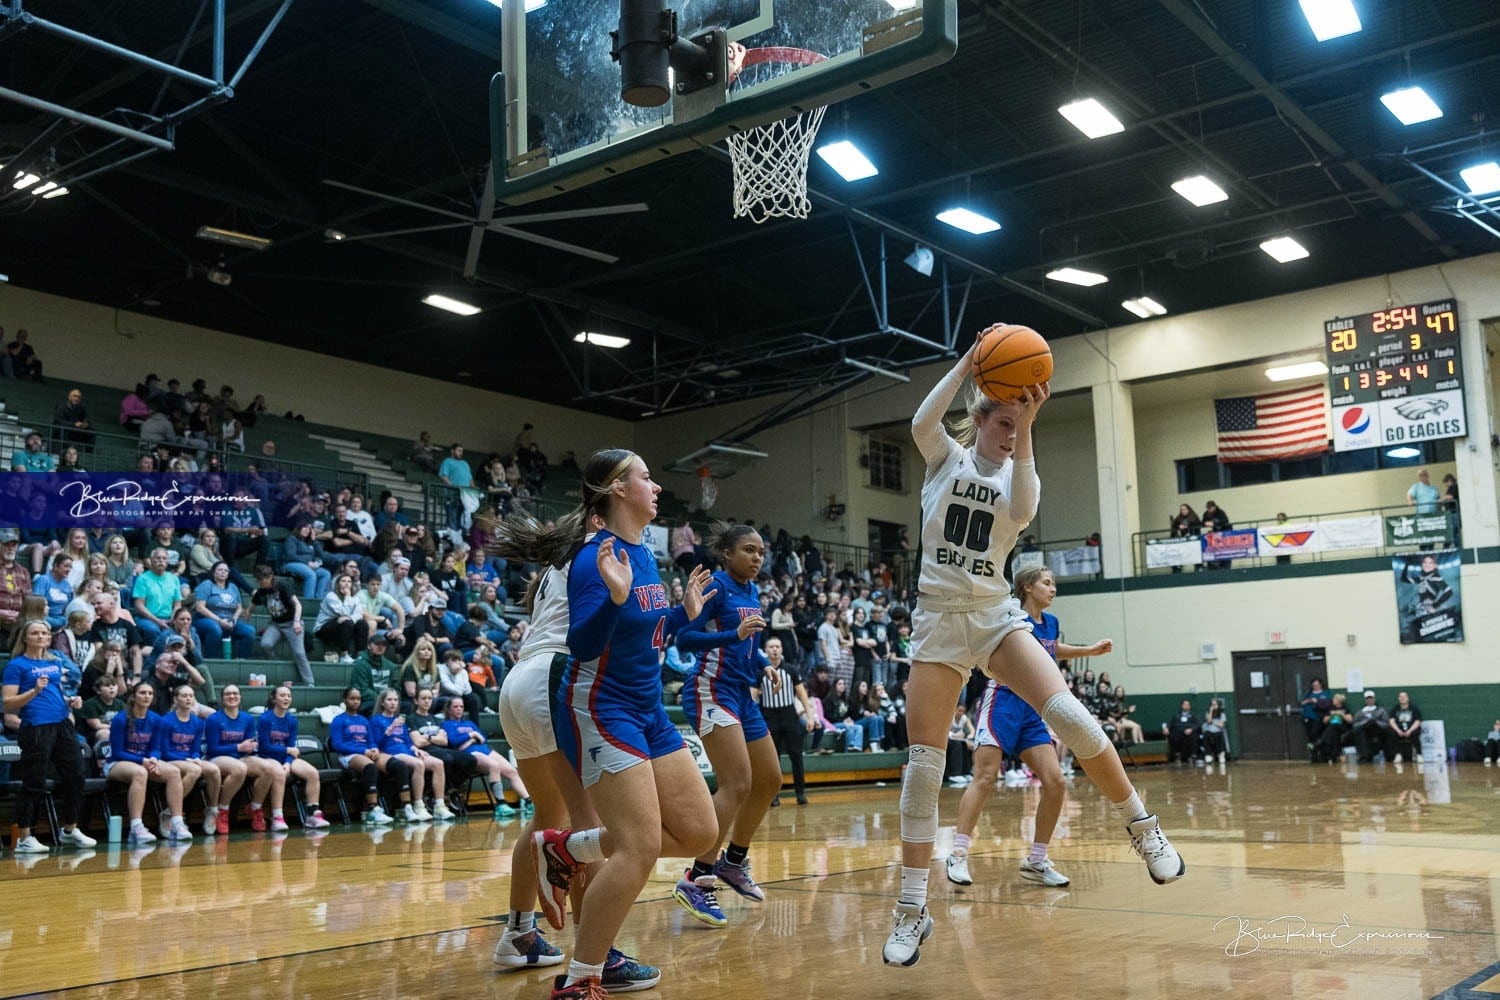 West Henderson Girls Basketball Stay 8-0 in Victory over East Henderson